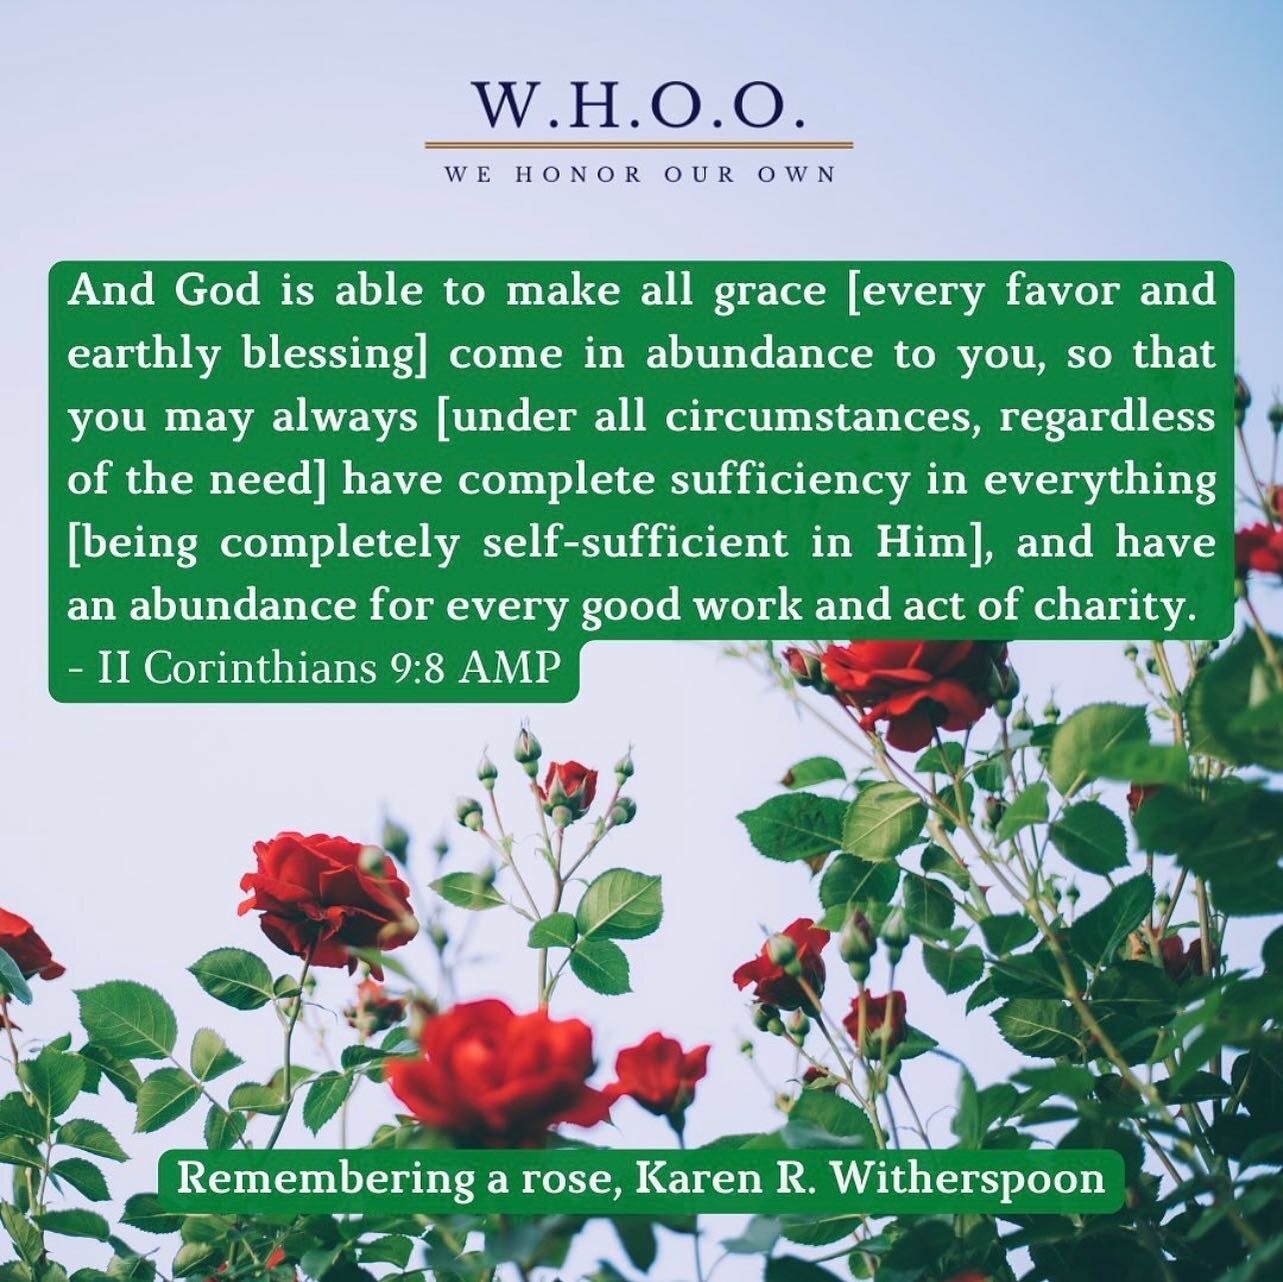 And God is able to make all grace [every favor and earthly blessing] come in abundance to you, so that you may always [under all circumstances, regardless of the need] have complete sufficiency in everything [being completely self-sufficient in Him],